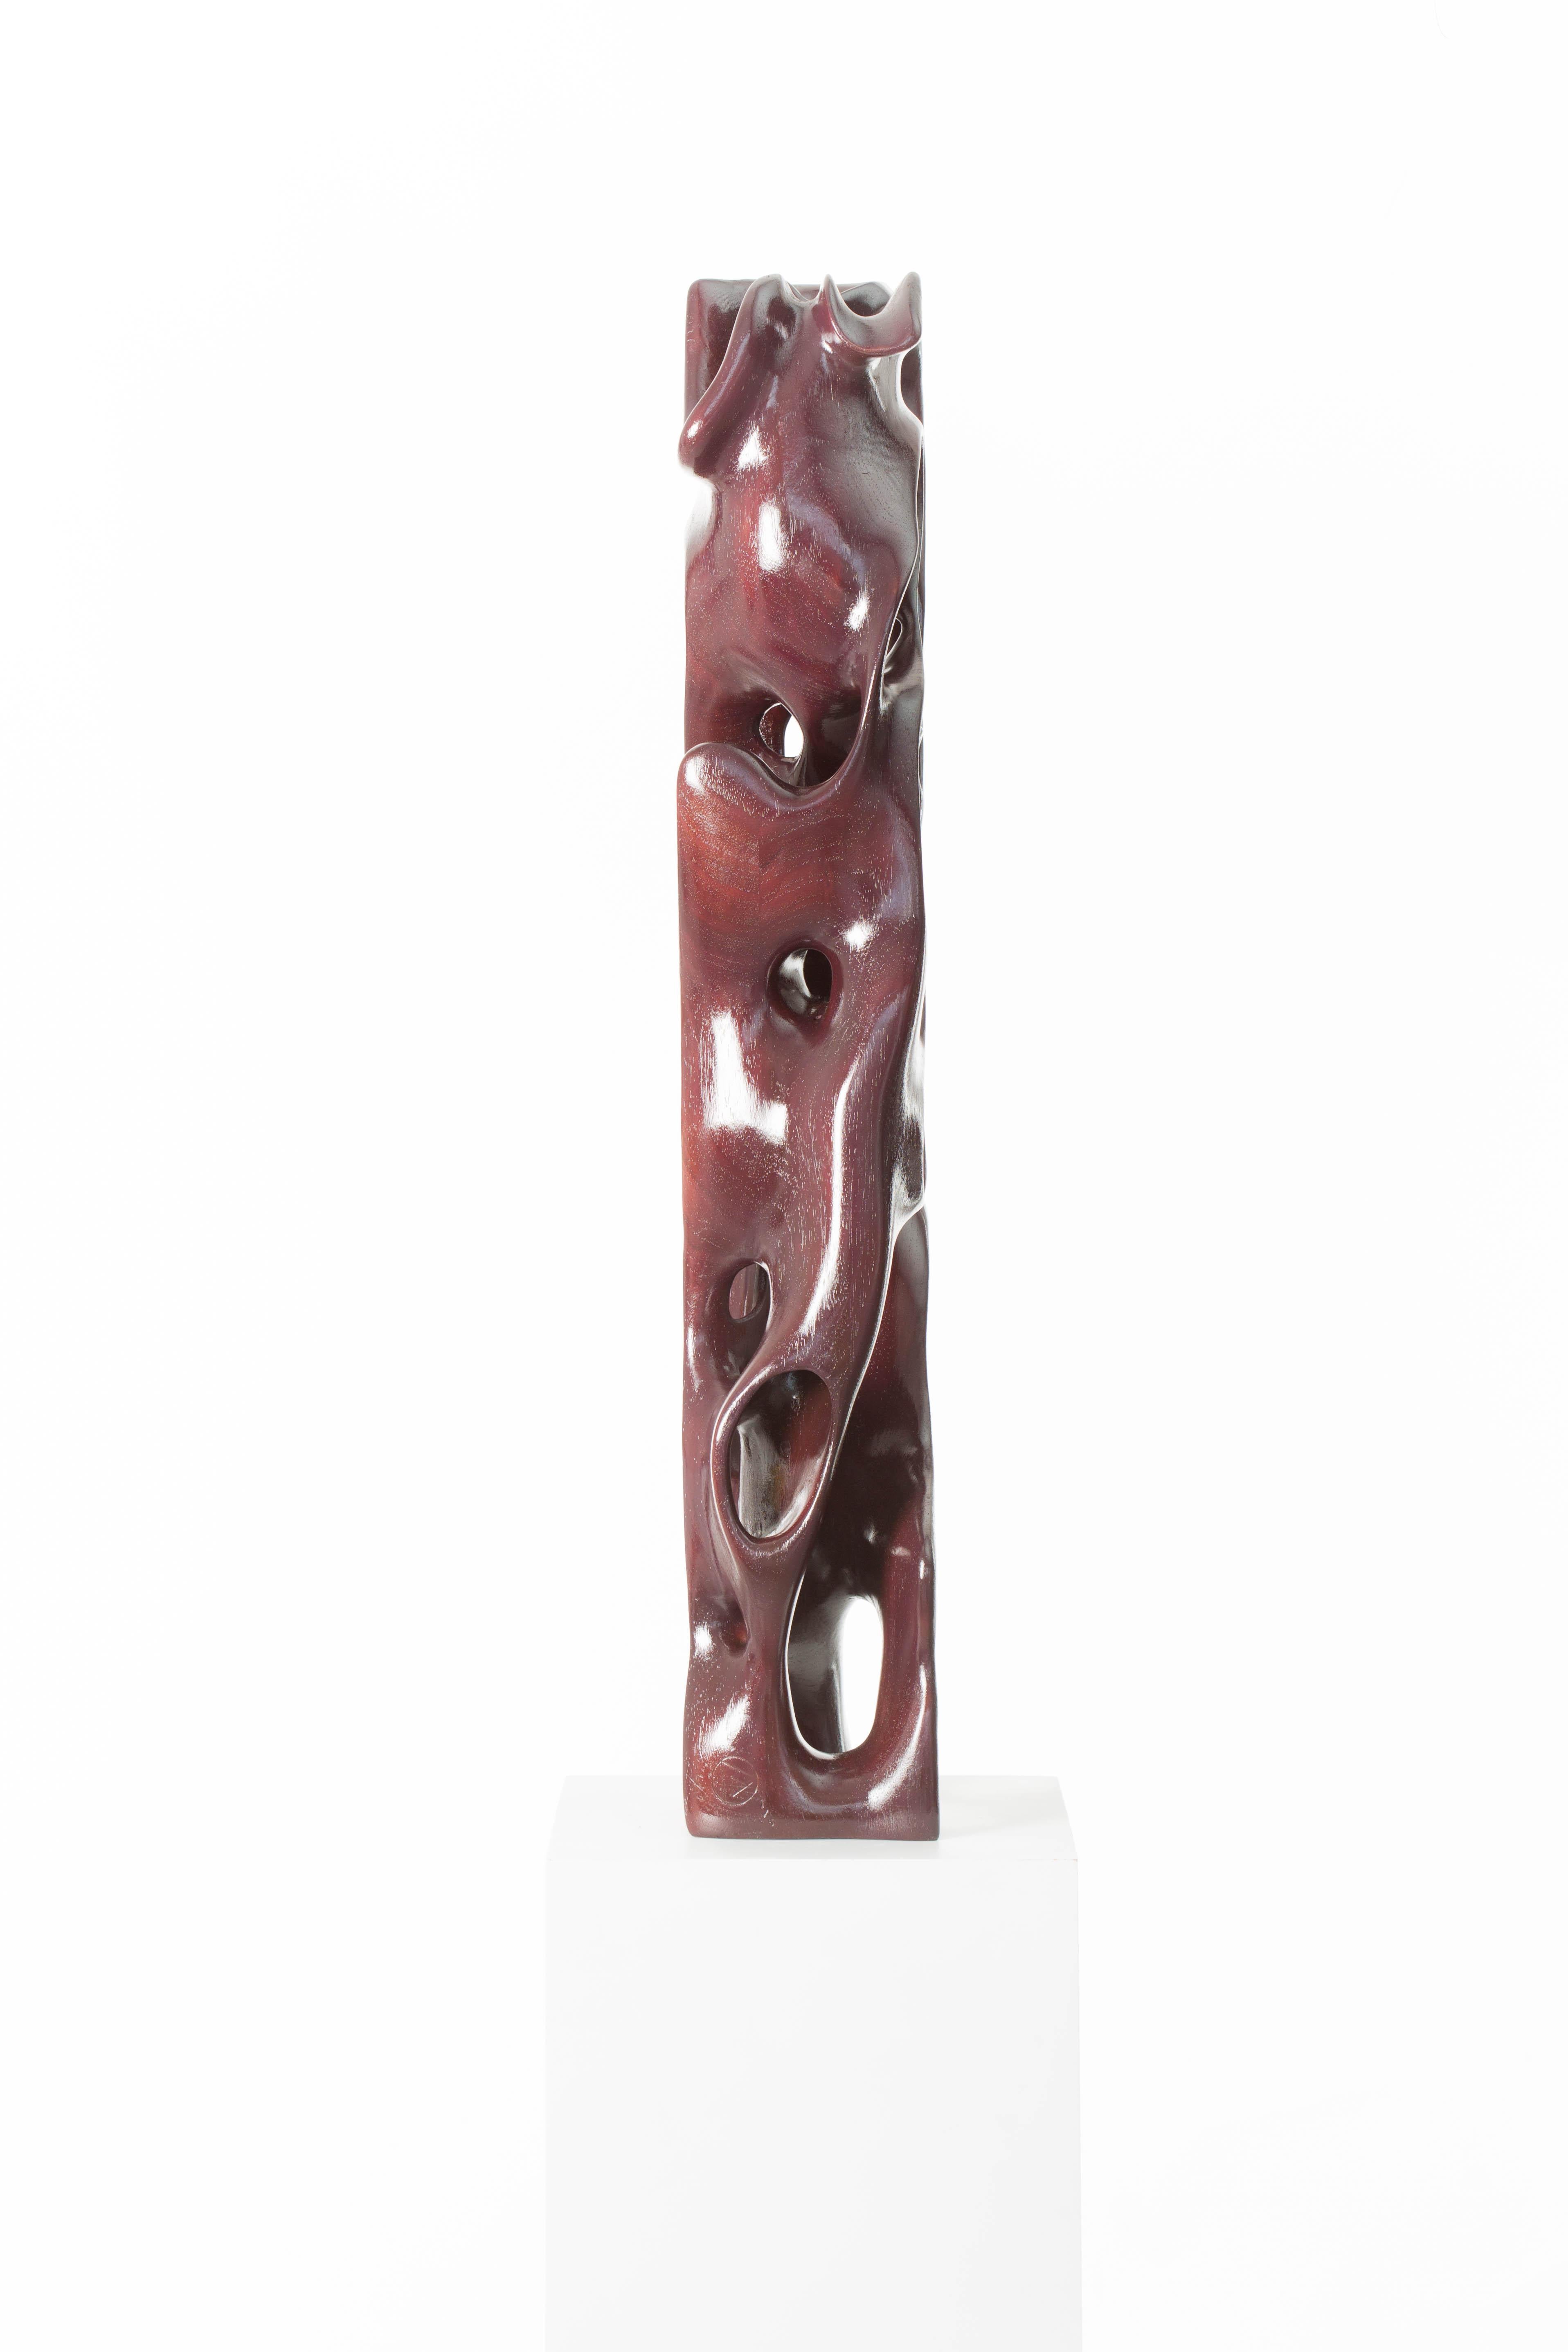 South African You Can Lean on Me Sculpture by Driaan Claassen For Sale